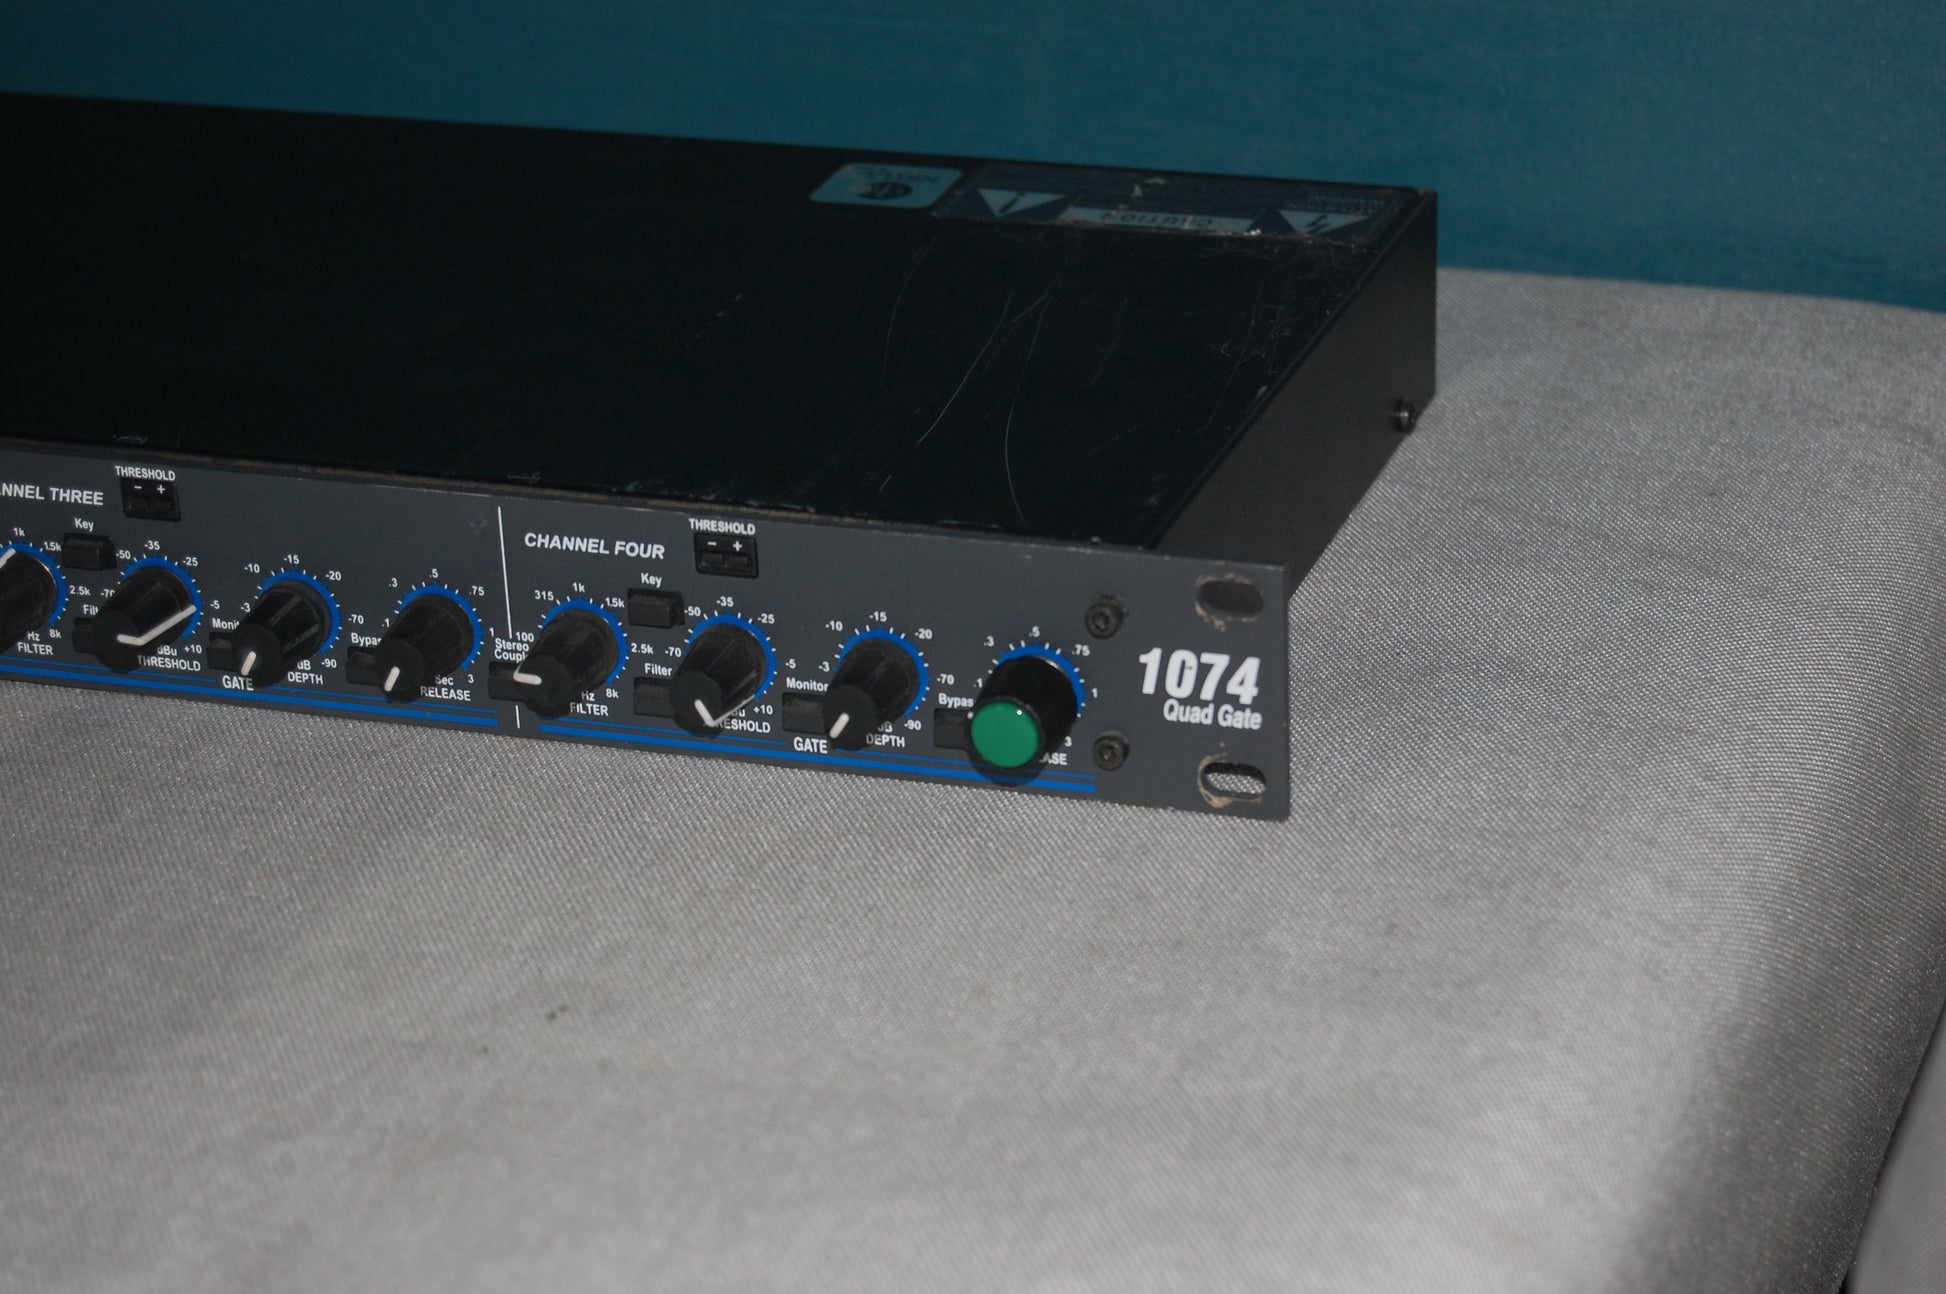 Used dbx 1046 Quad Compressor / Limiter for Sale. Used dbx 1046 Quad Compressor / Limiter for Sale. 					We Sell Professional Audio Equipment. Audio Systems, Amplifiers, Consoles, Mixers, Electronics, Entertainment, Sound, Live.